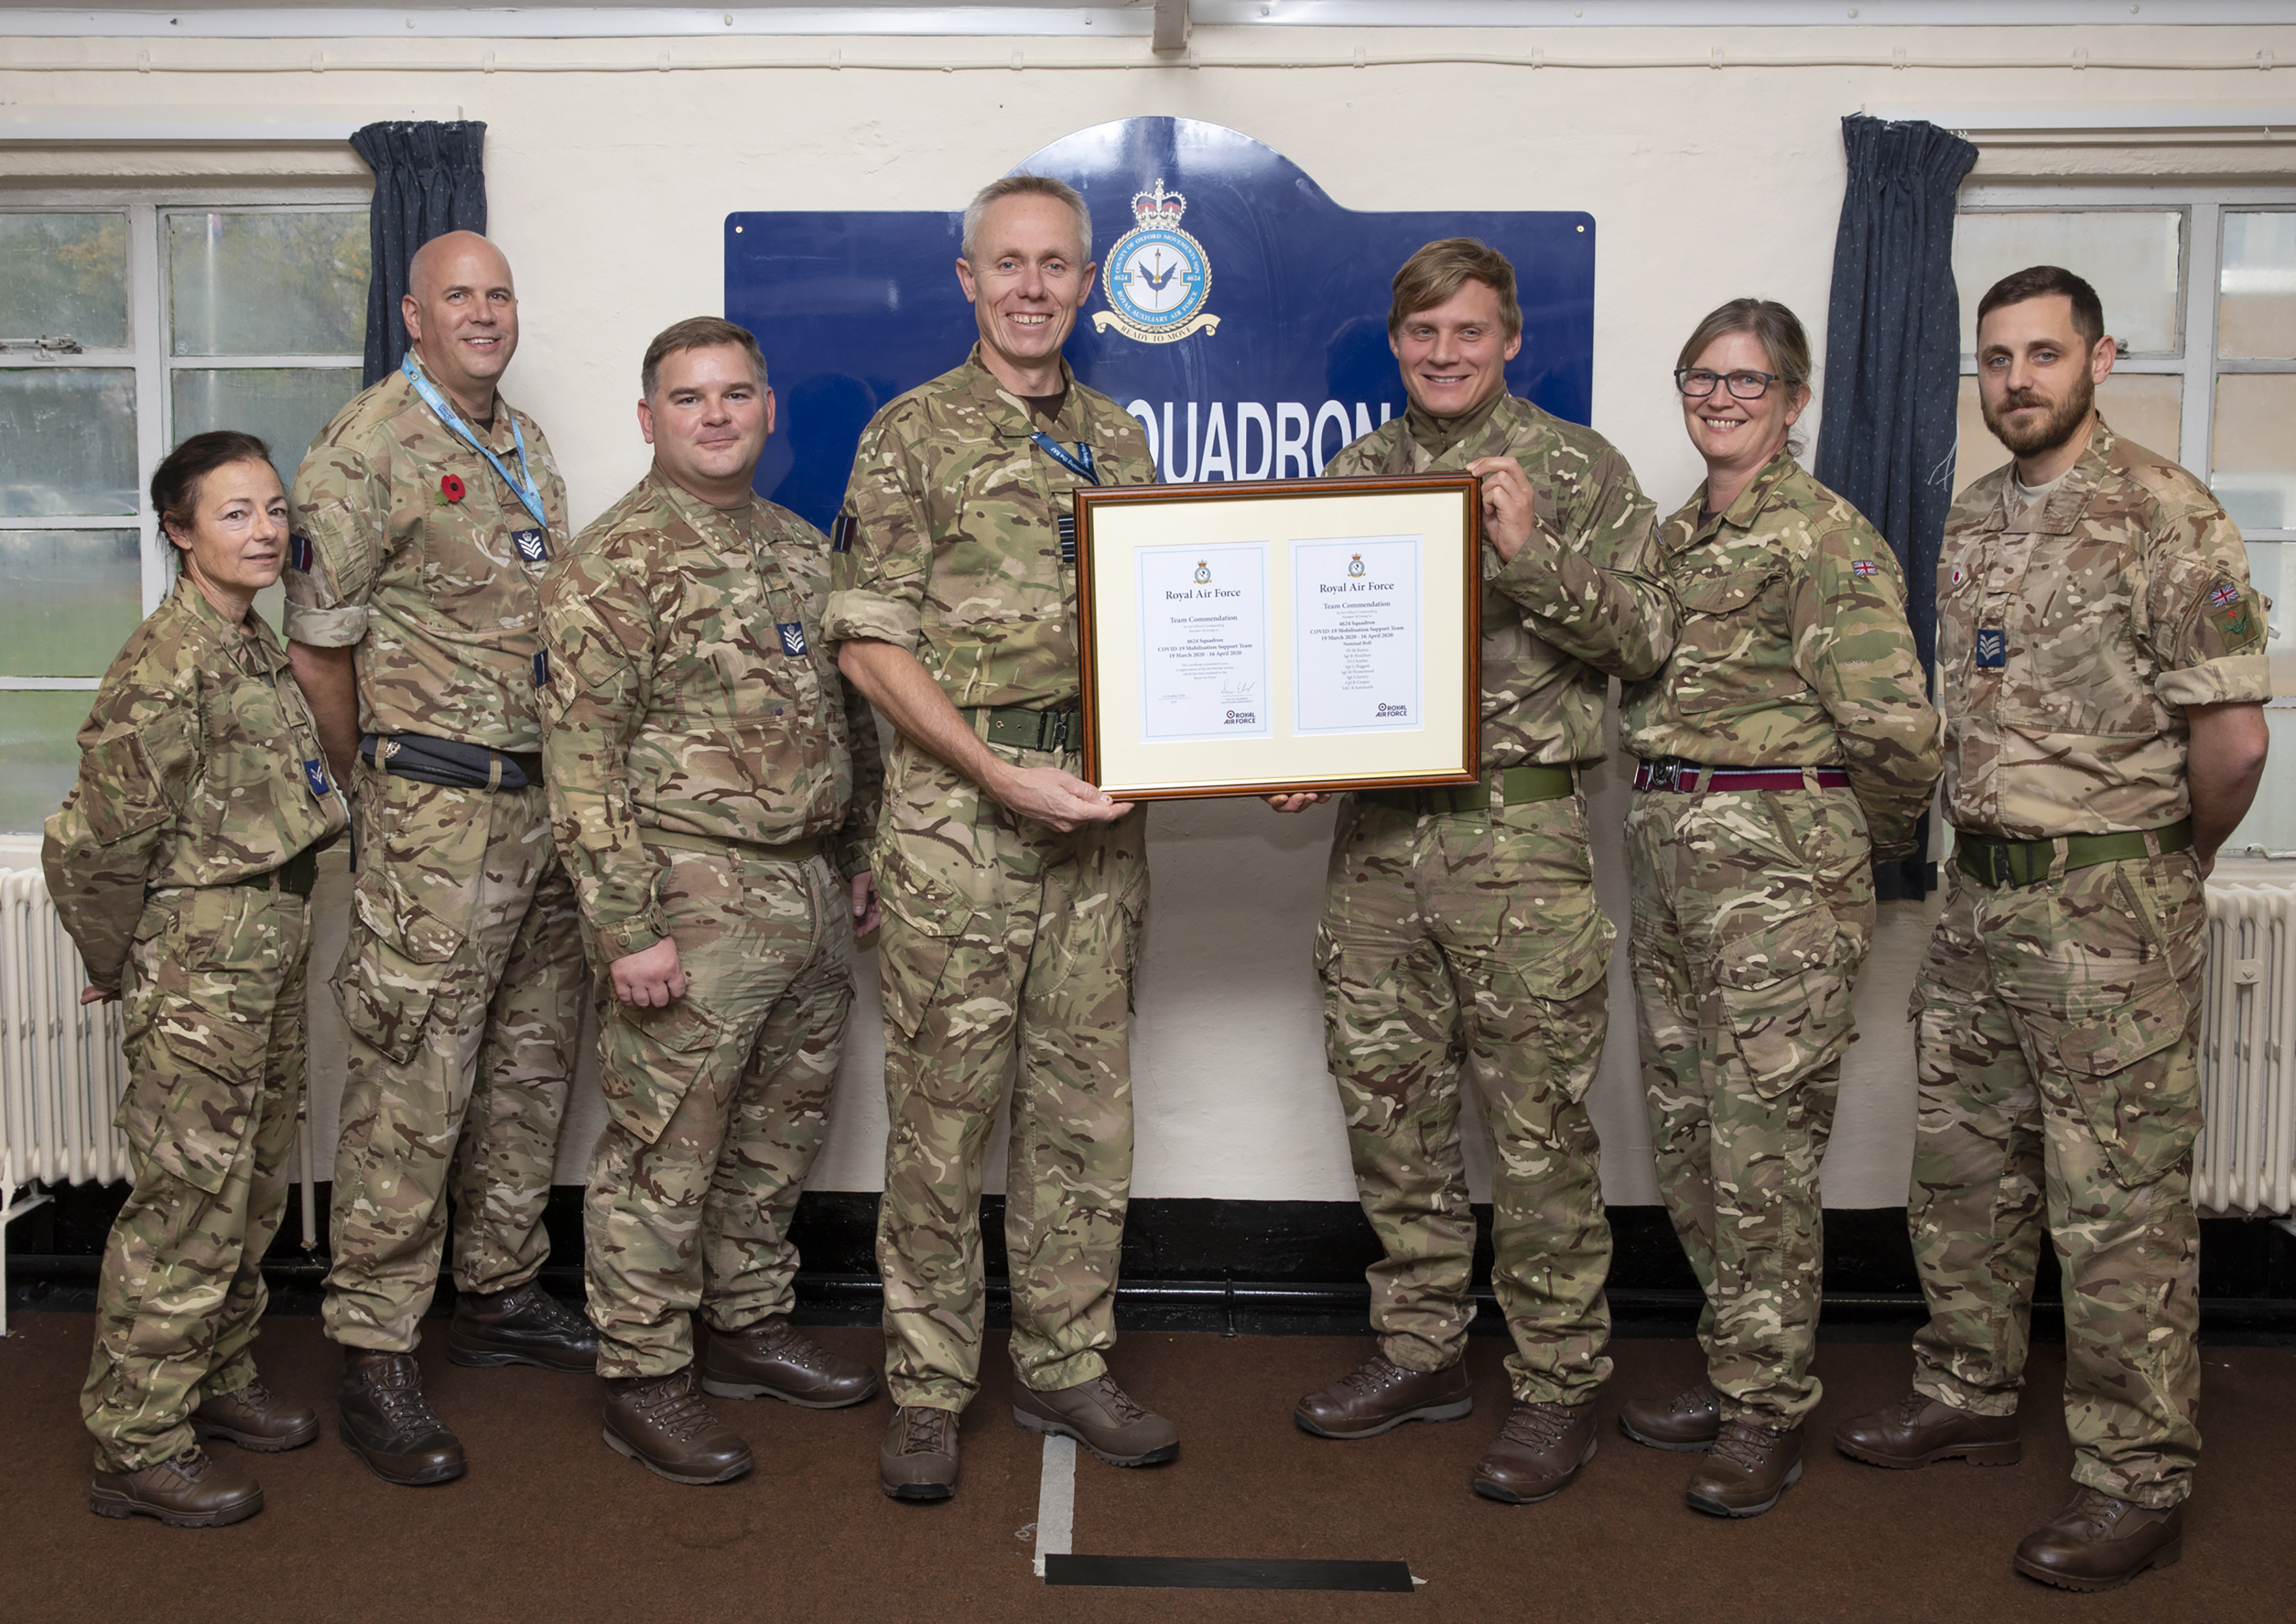 Number 4624 Squadron Award of Team Commendation